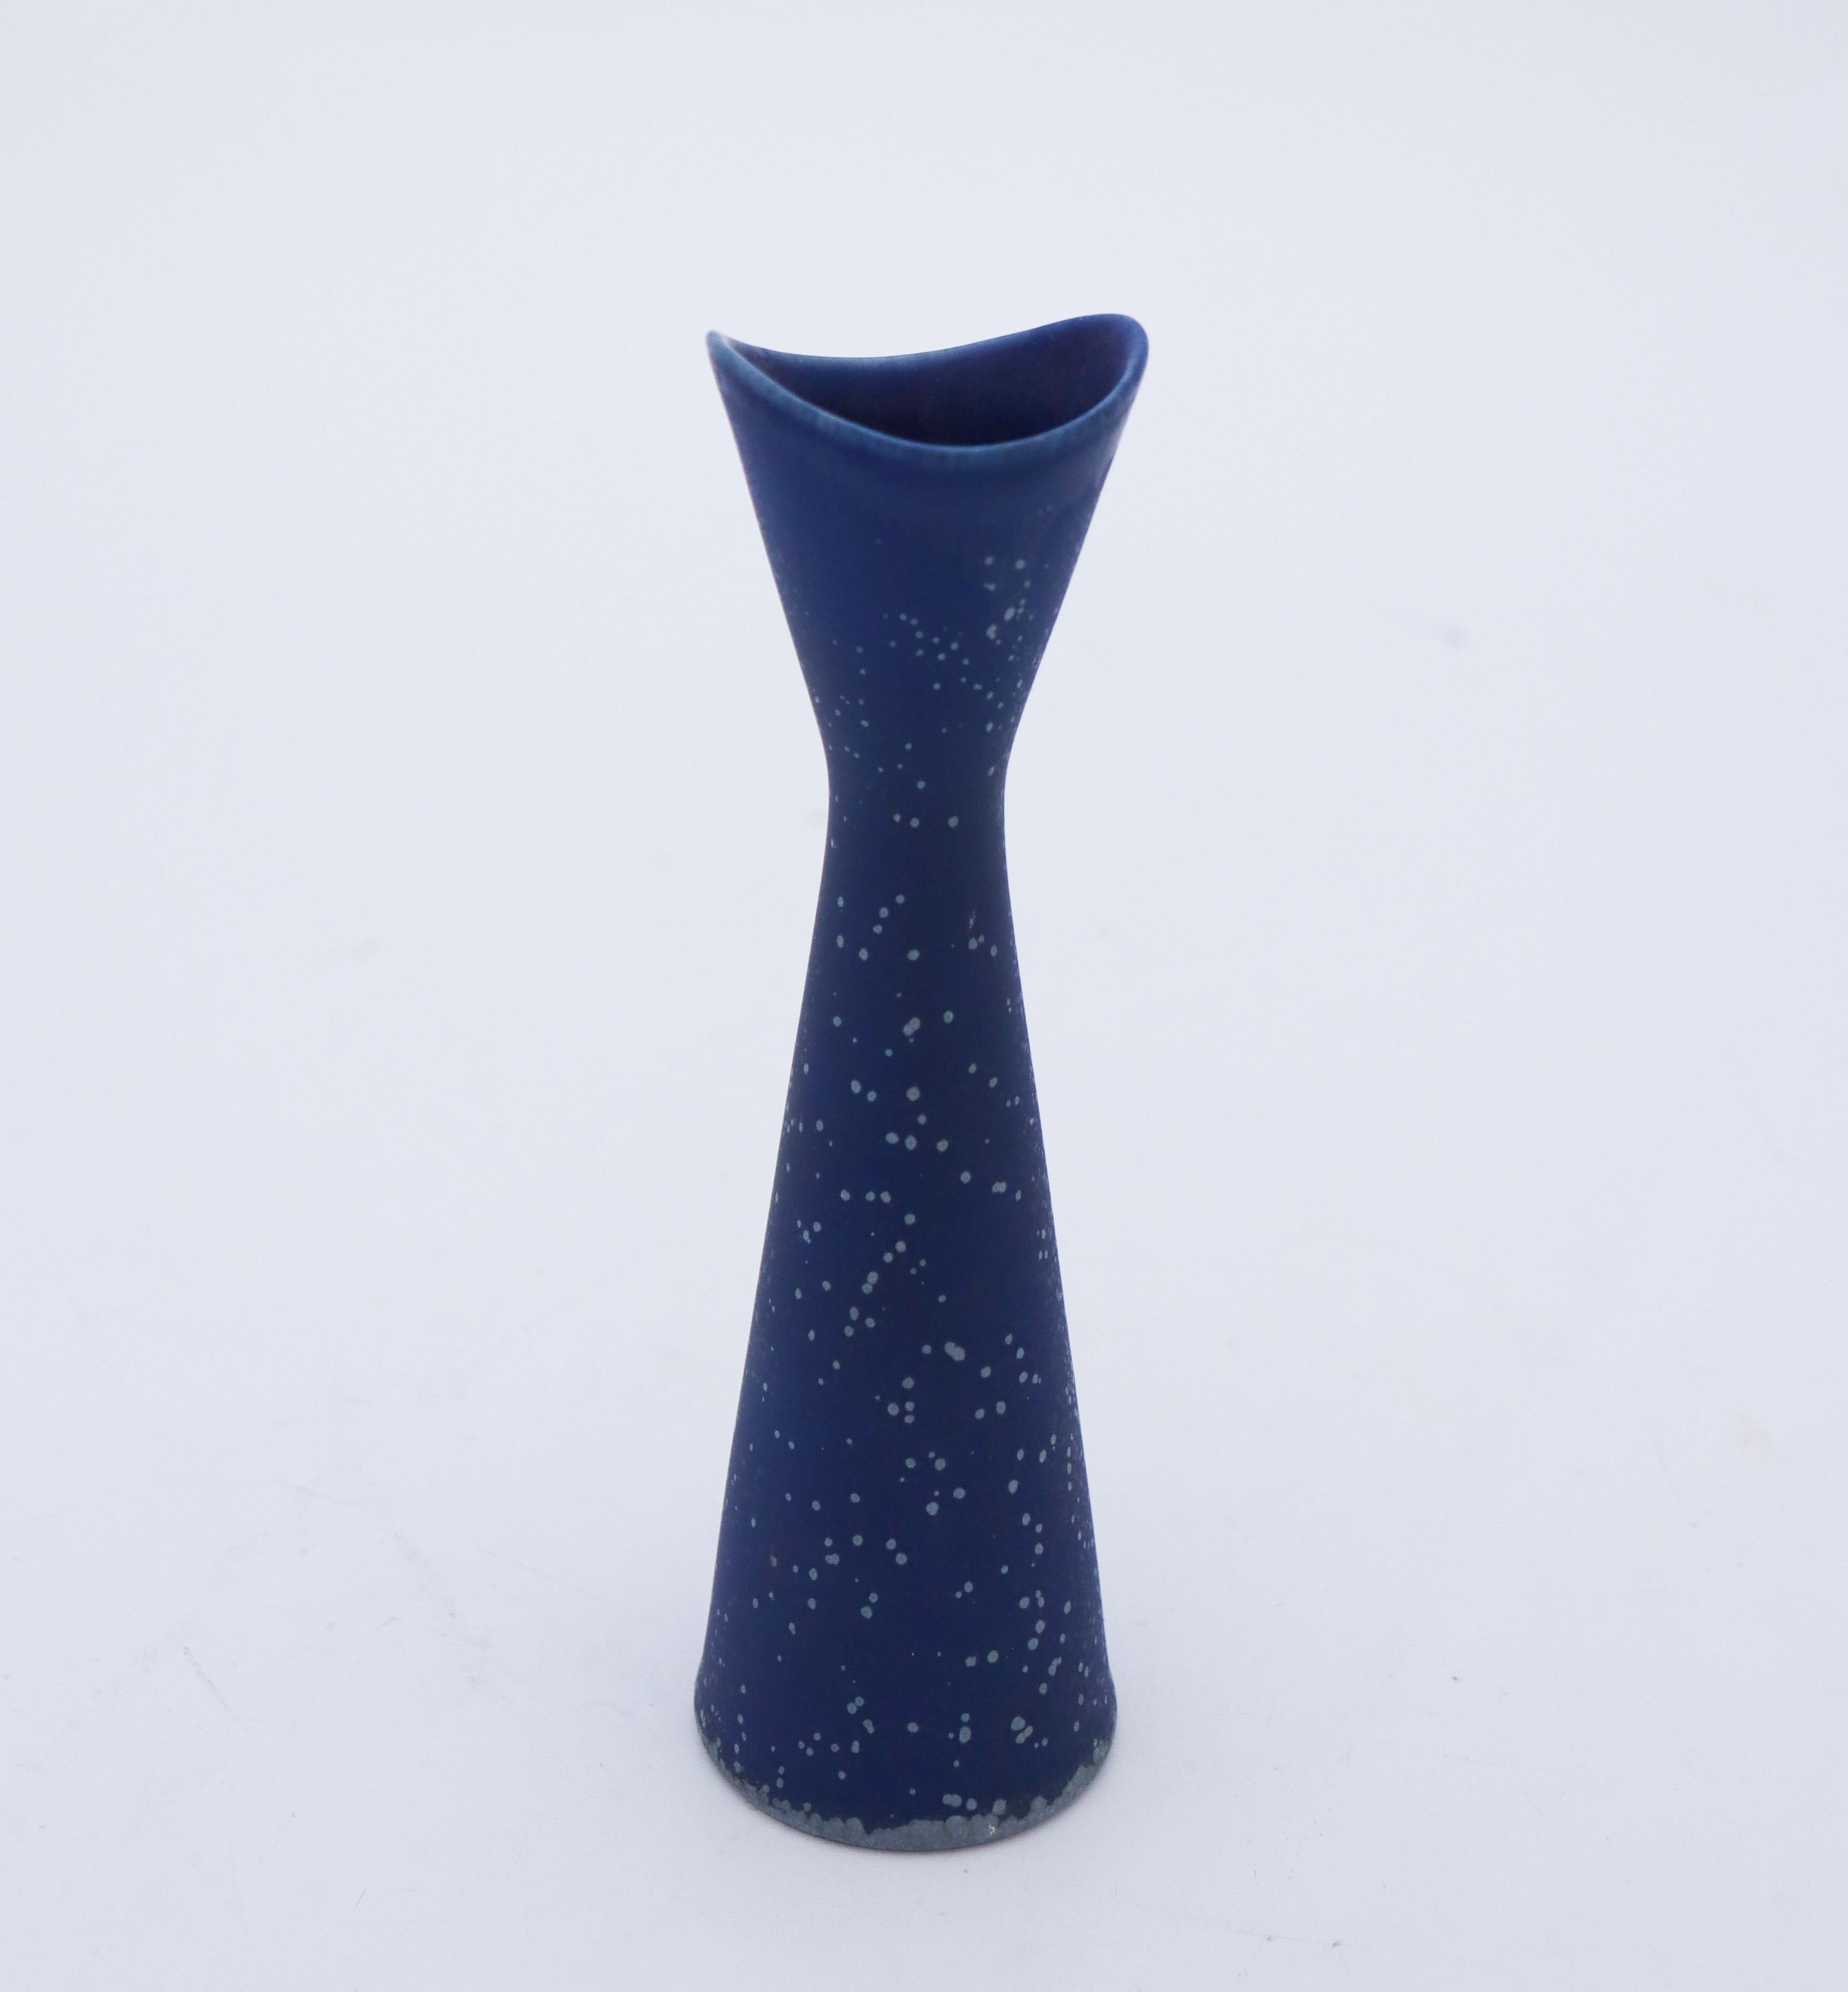 A lovely blue vase designed by Gunnar Nylund at Nymölle in Denmark in the 1960s, it´s 17.5 cm (7) high. It´s in mint condition and marked as 1:st quality. 

Gunnar Nylund was born in Paris 1904 with parents who worked as sculptors and designer so